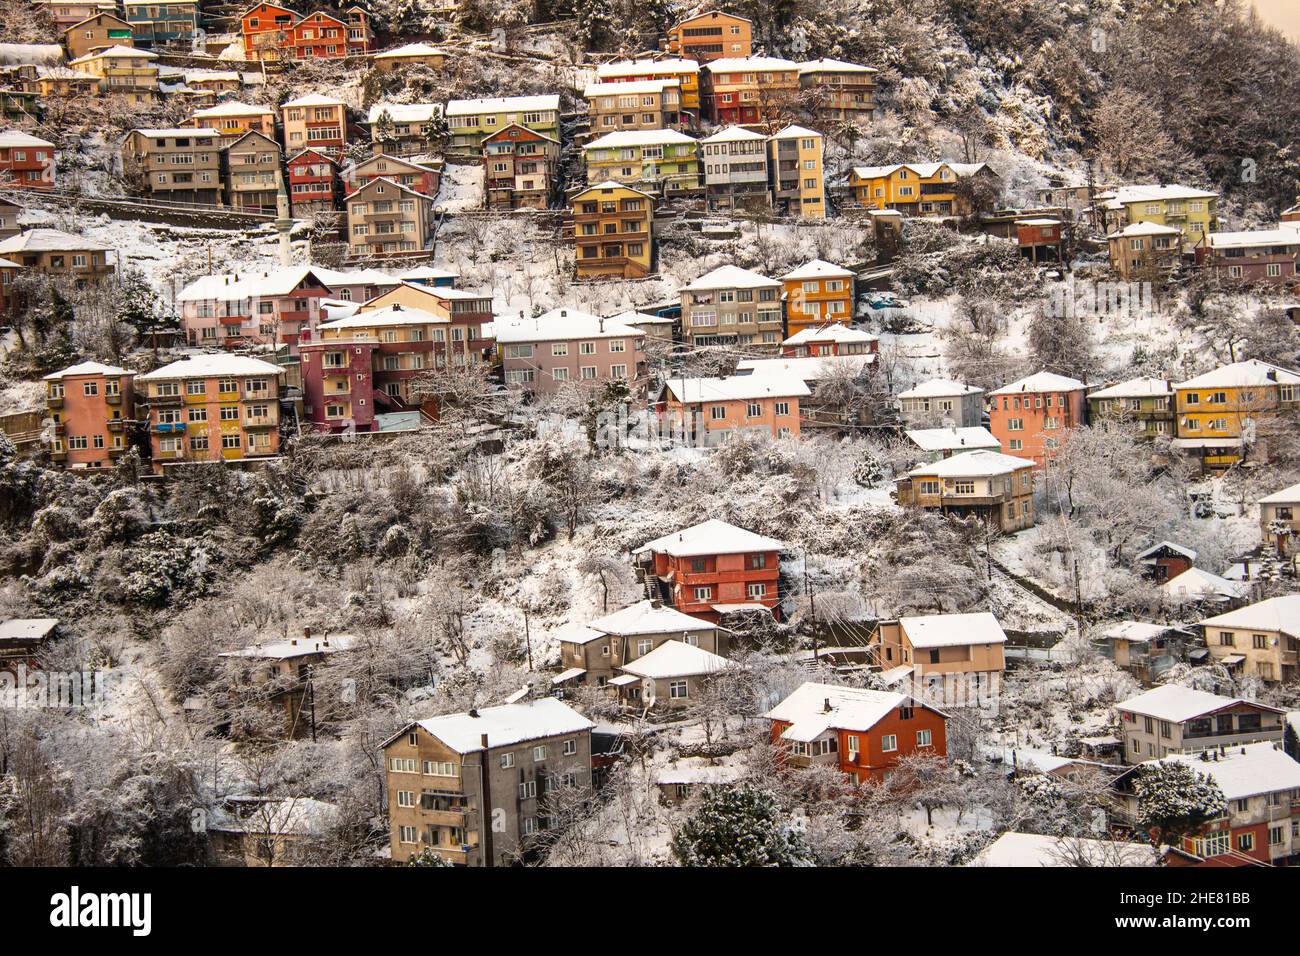 winter in Slums. snow and houses Stock Photo